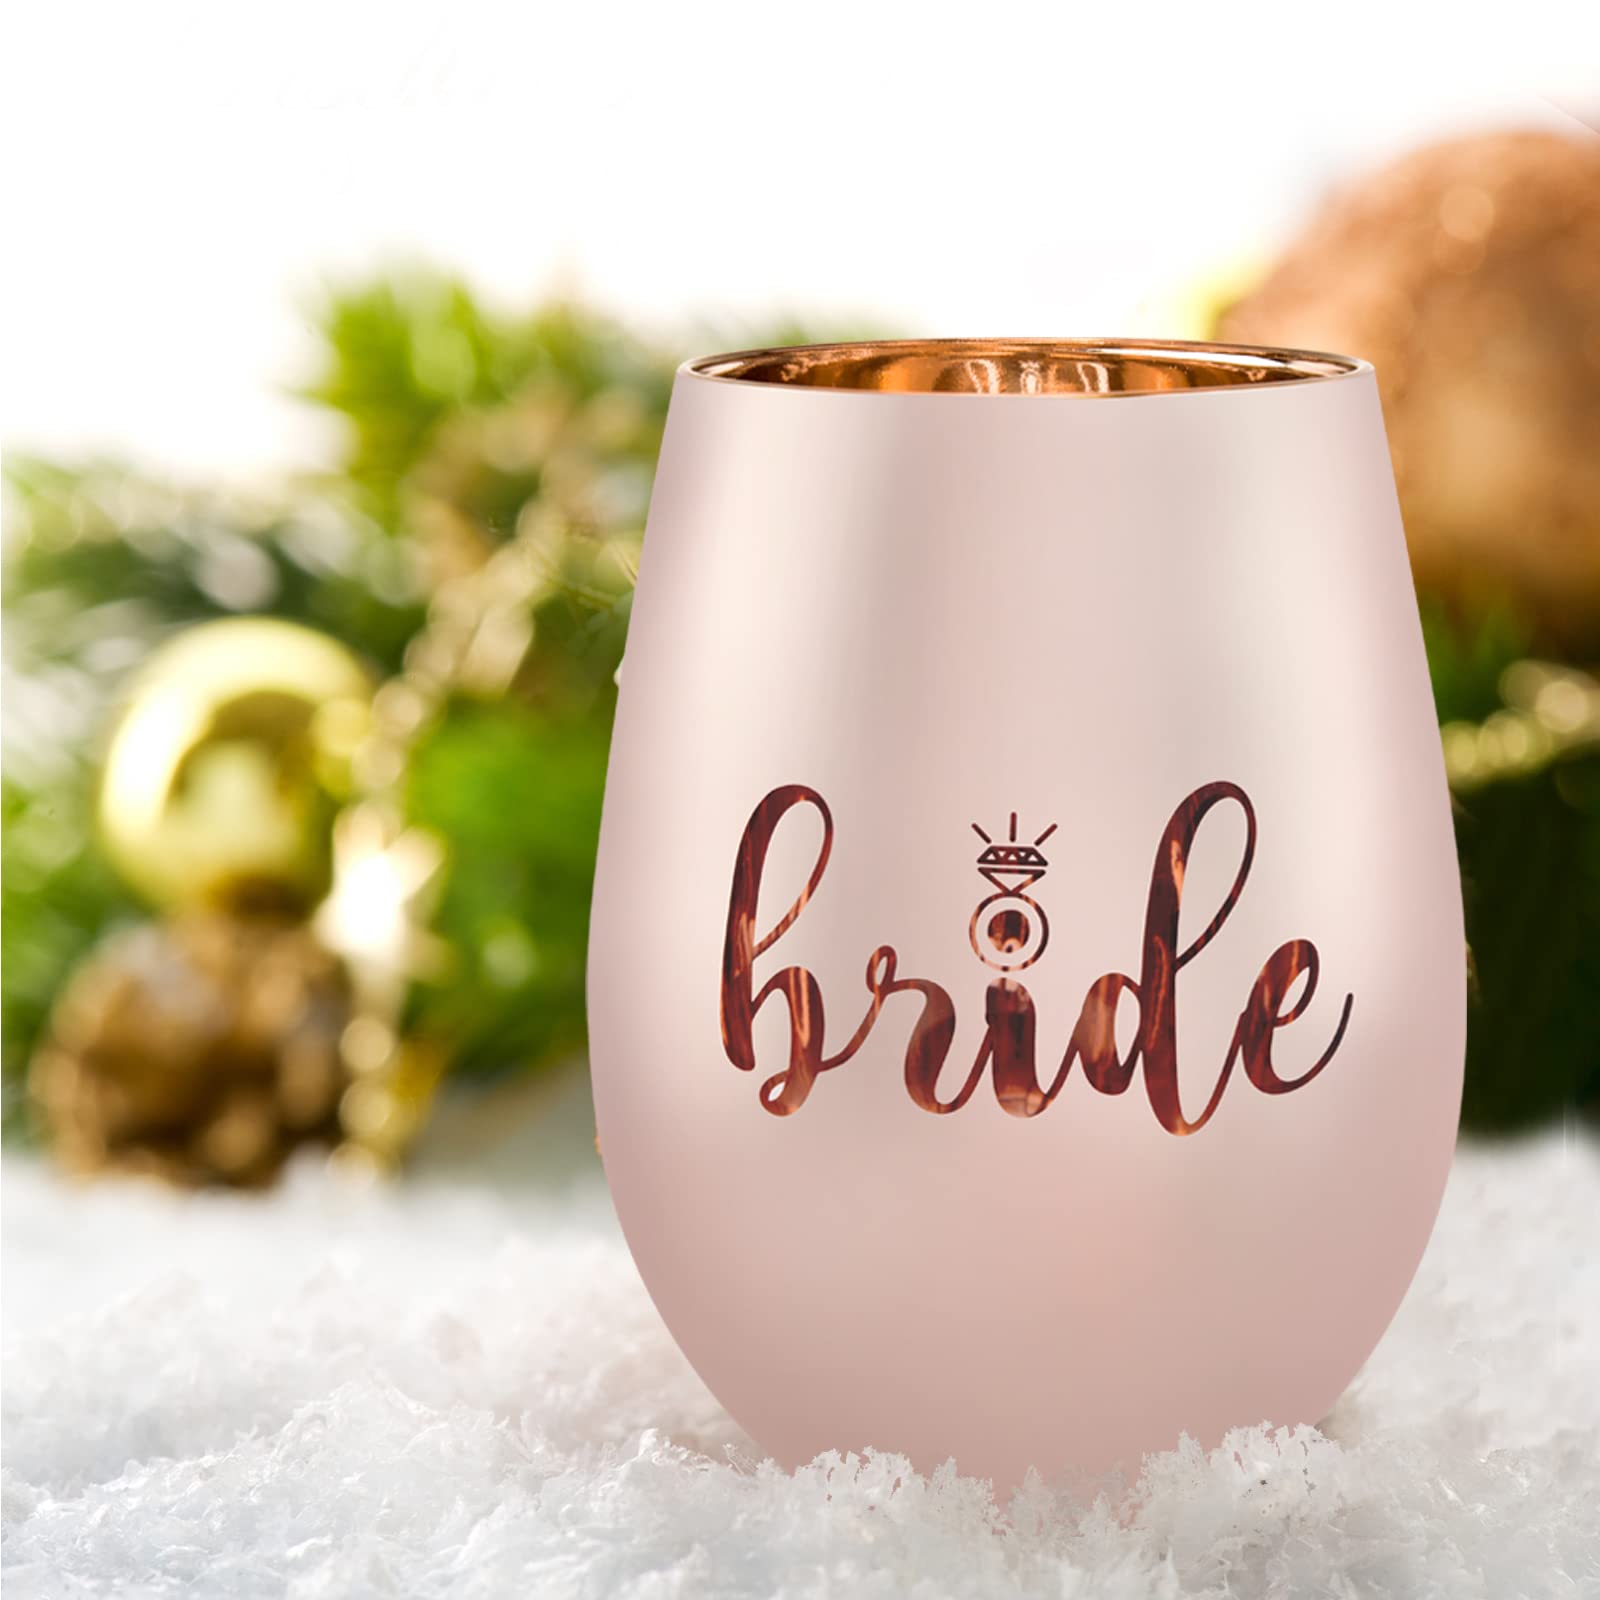 homeconlin Bride Gifts - Bridal Shower Gift - Bride Wine Glass - Gifts for Bride to be, Newly Engaged,Wedding, Engagement, Bachelorette Rose Gold